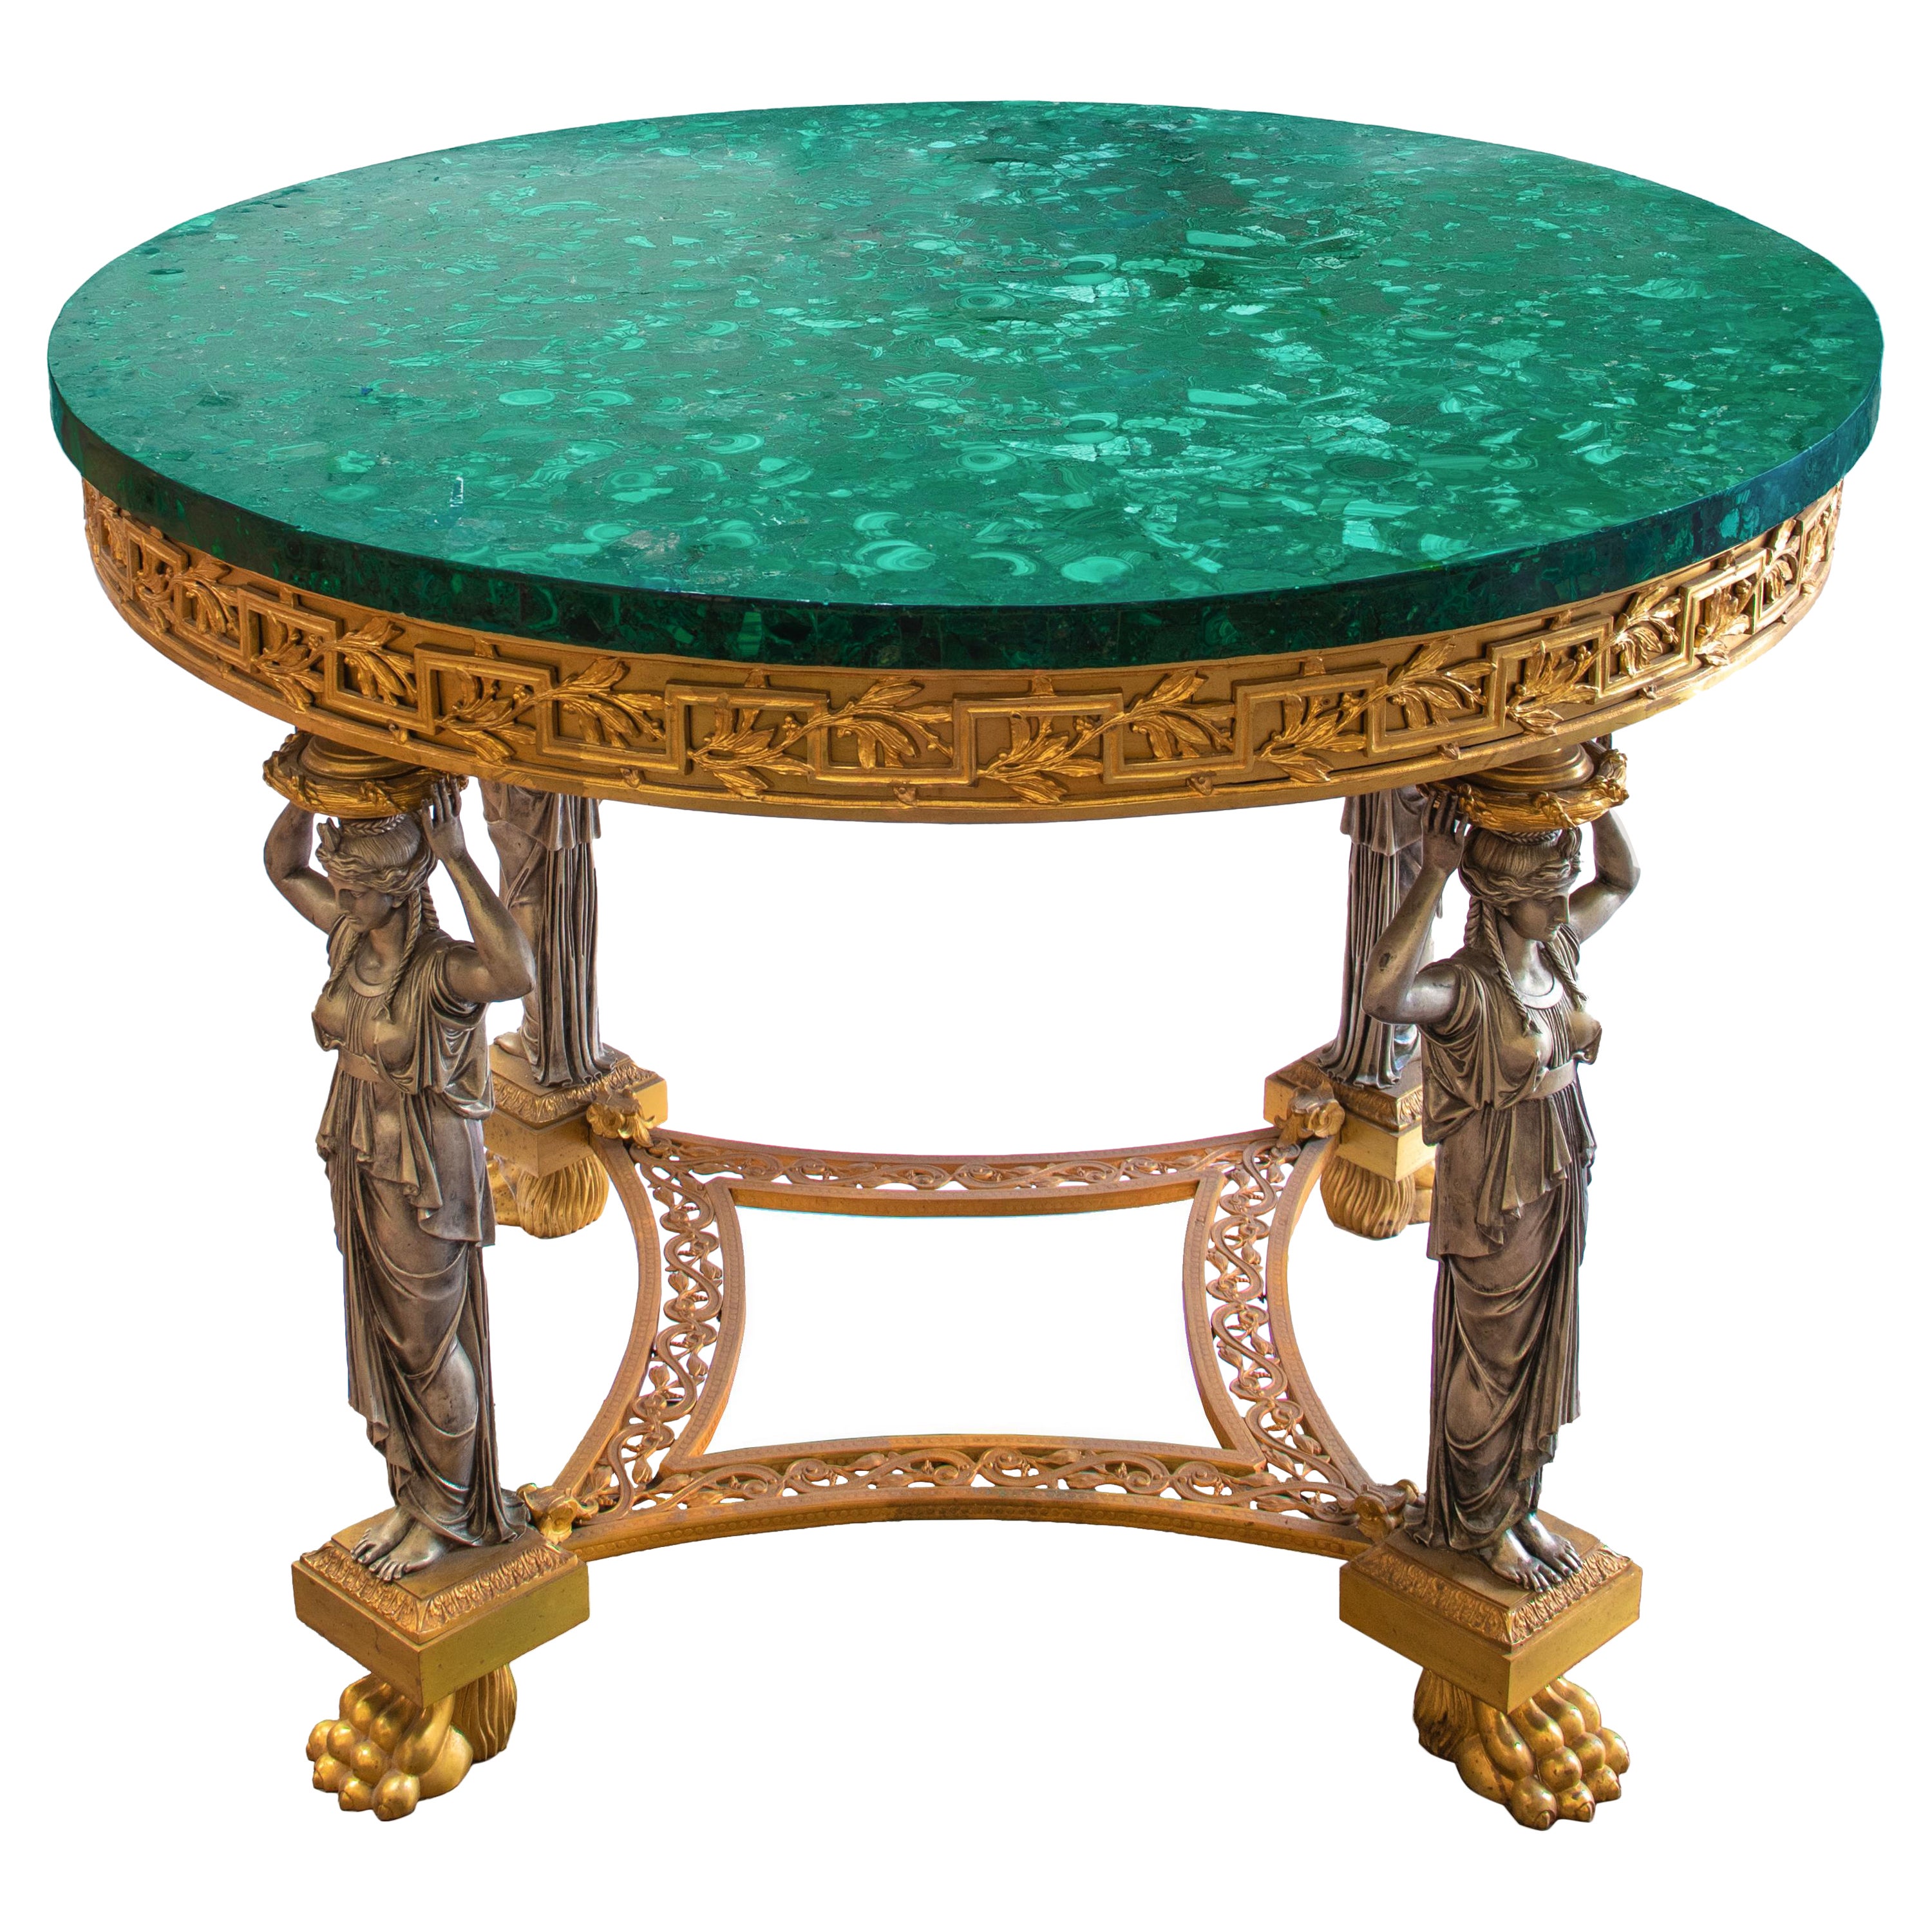 Neoclassical Gilt and Silvered Bronze Center Table with Malachite Tabletop